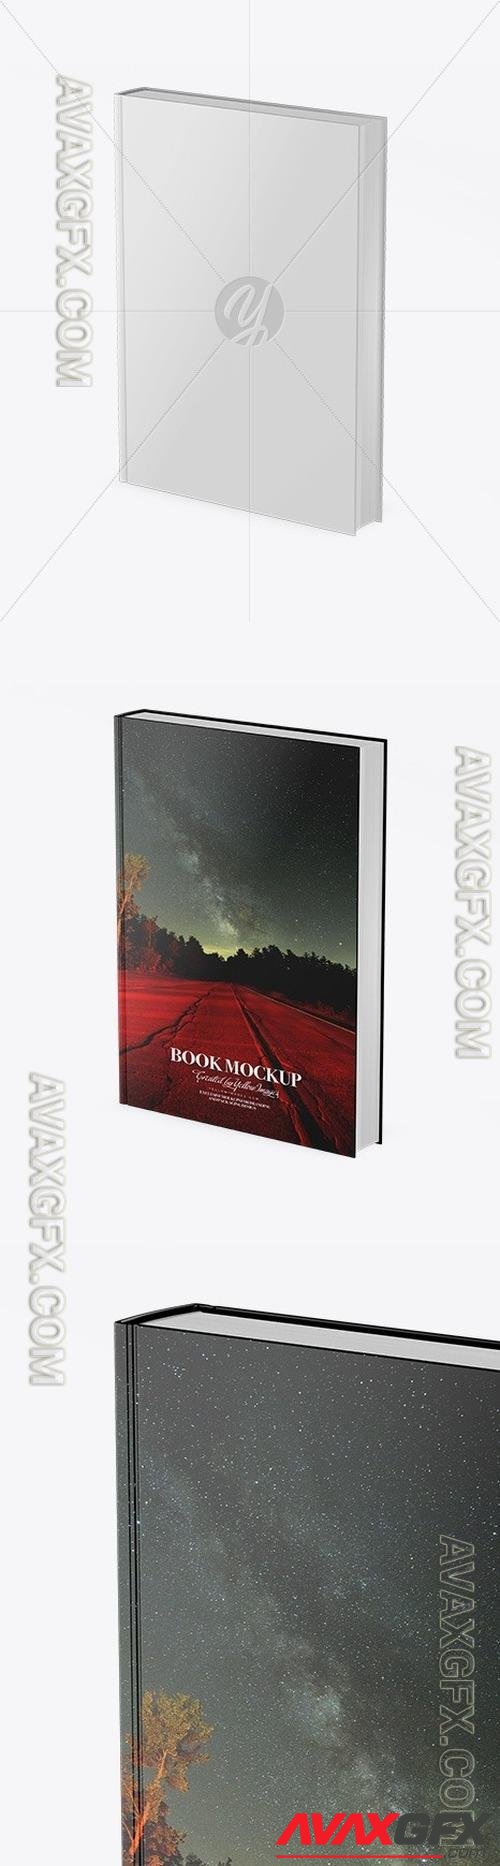 Book w/ Glossy Cover Mockup - Half Side View 50826 TIF